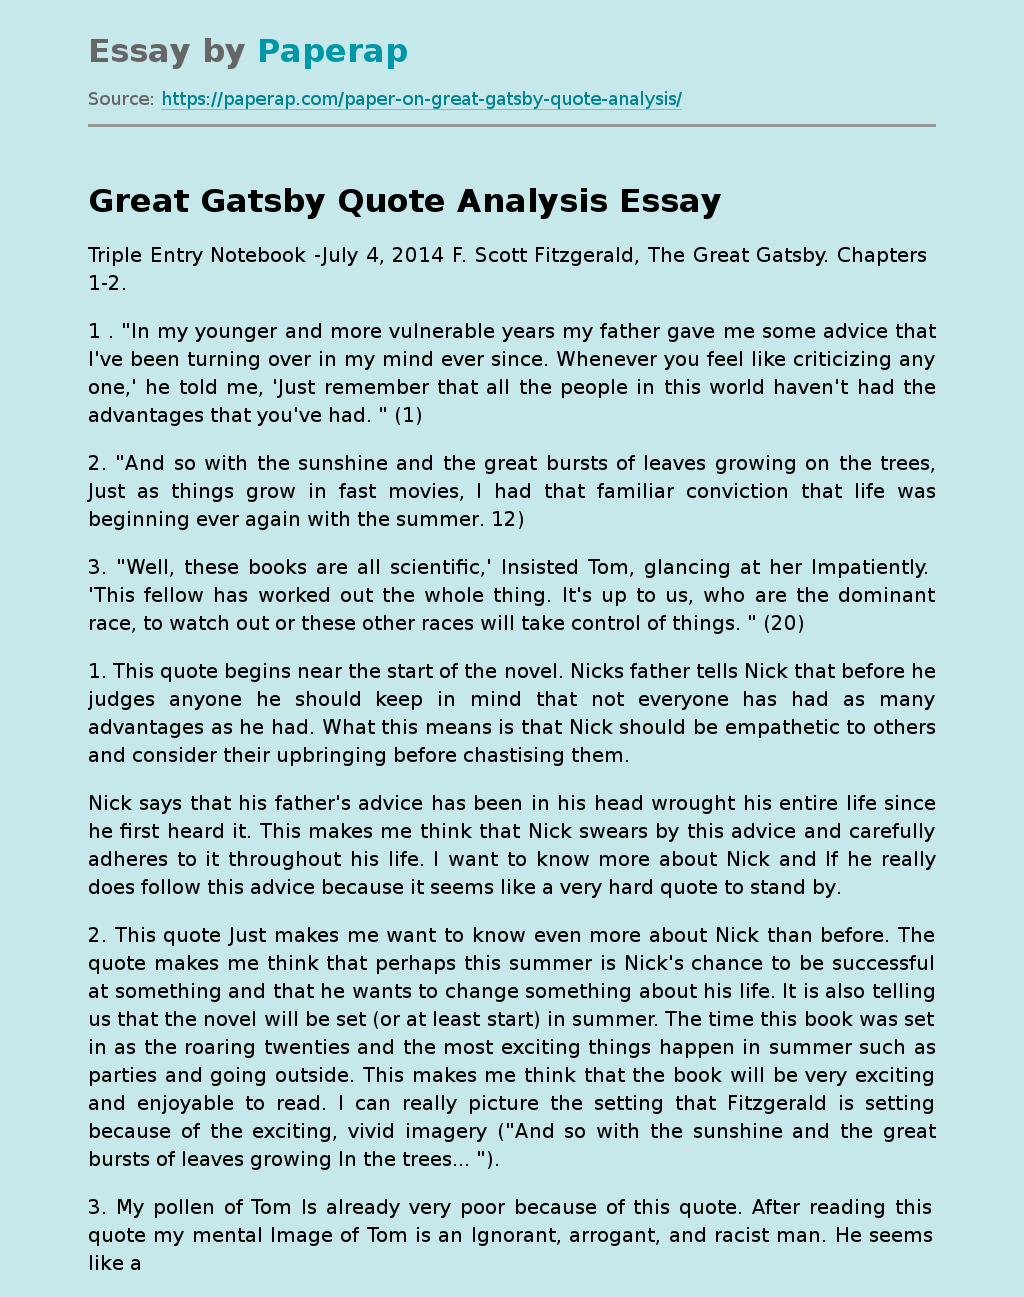 Great Gatsby Quote Analysis